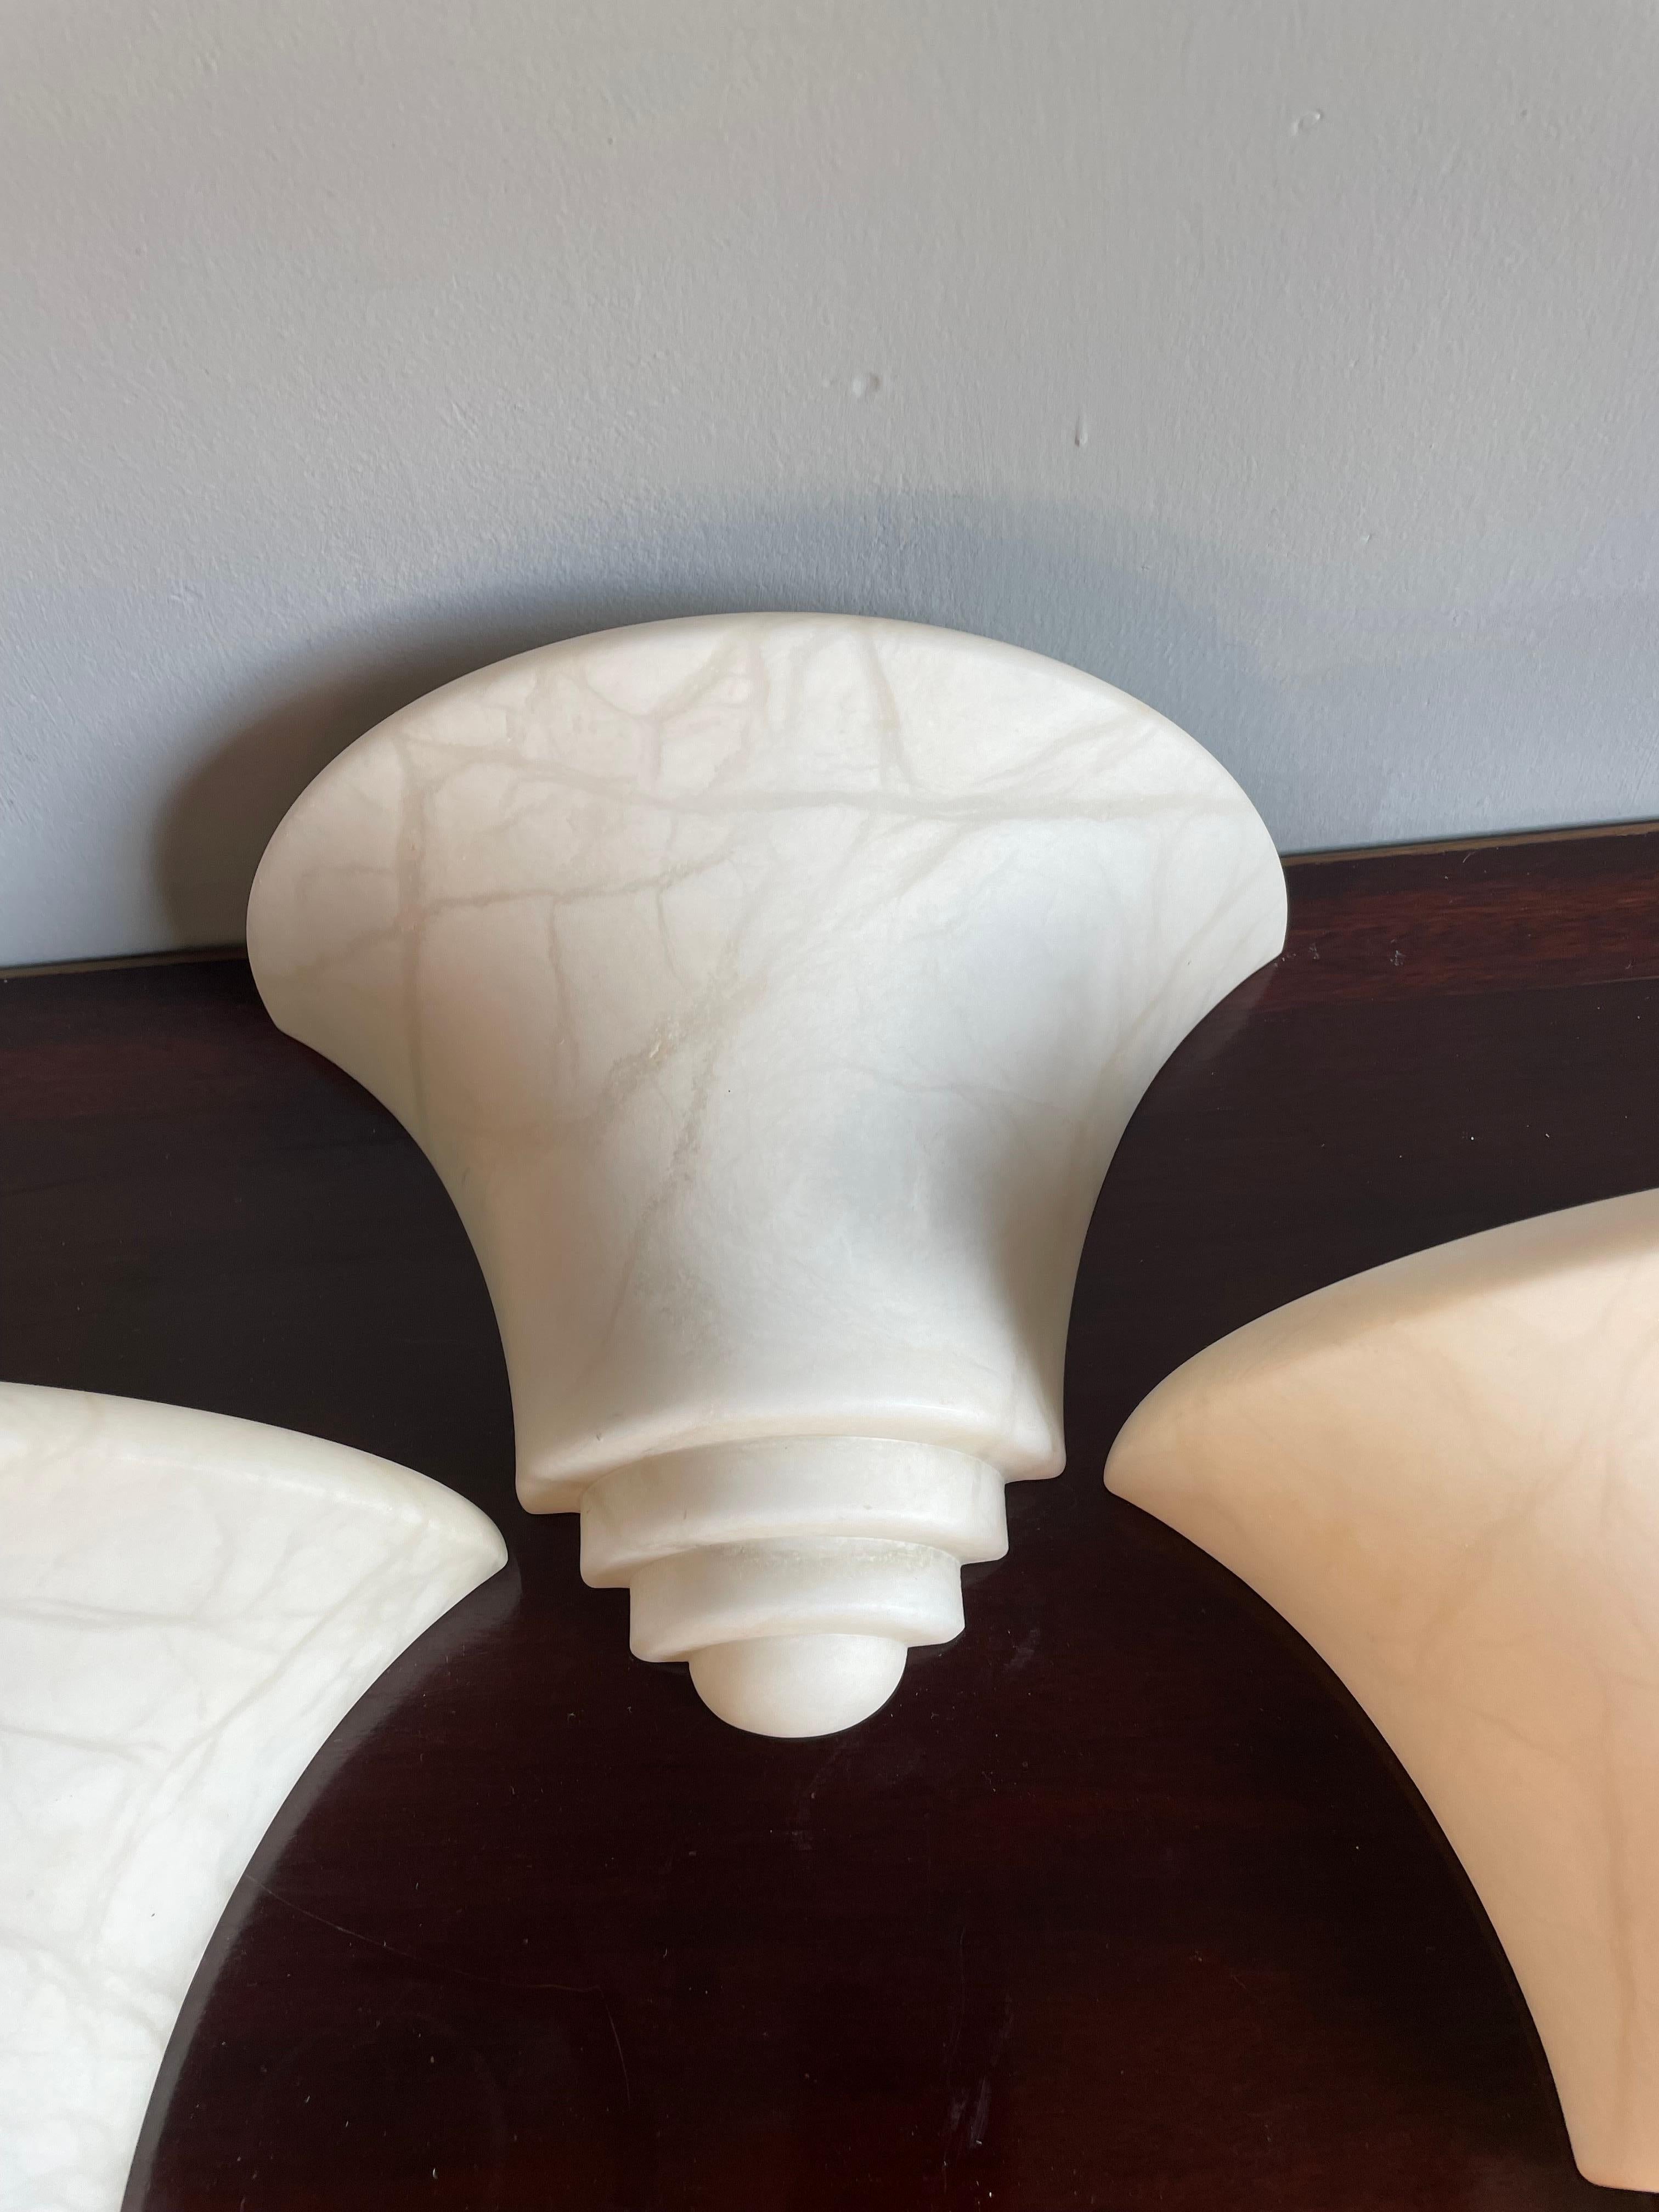 Five Mint Condition Art Deco Style, Midcentury Made Alabaster Stone Wall Sconces For Sale 4